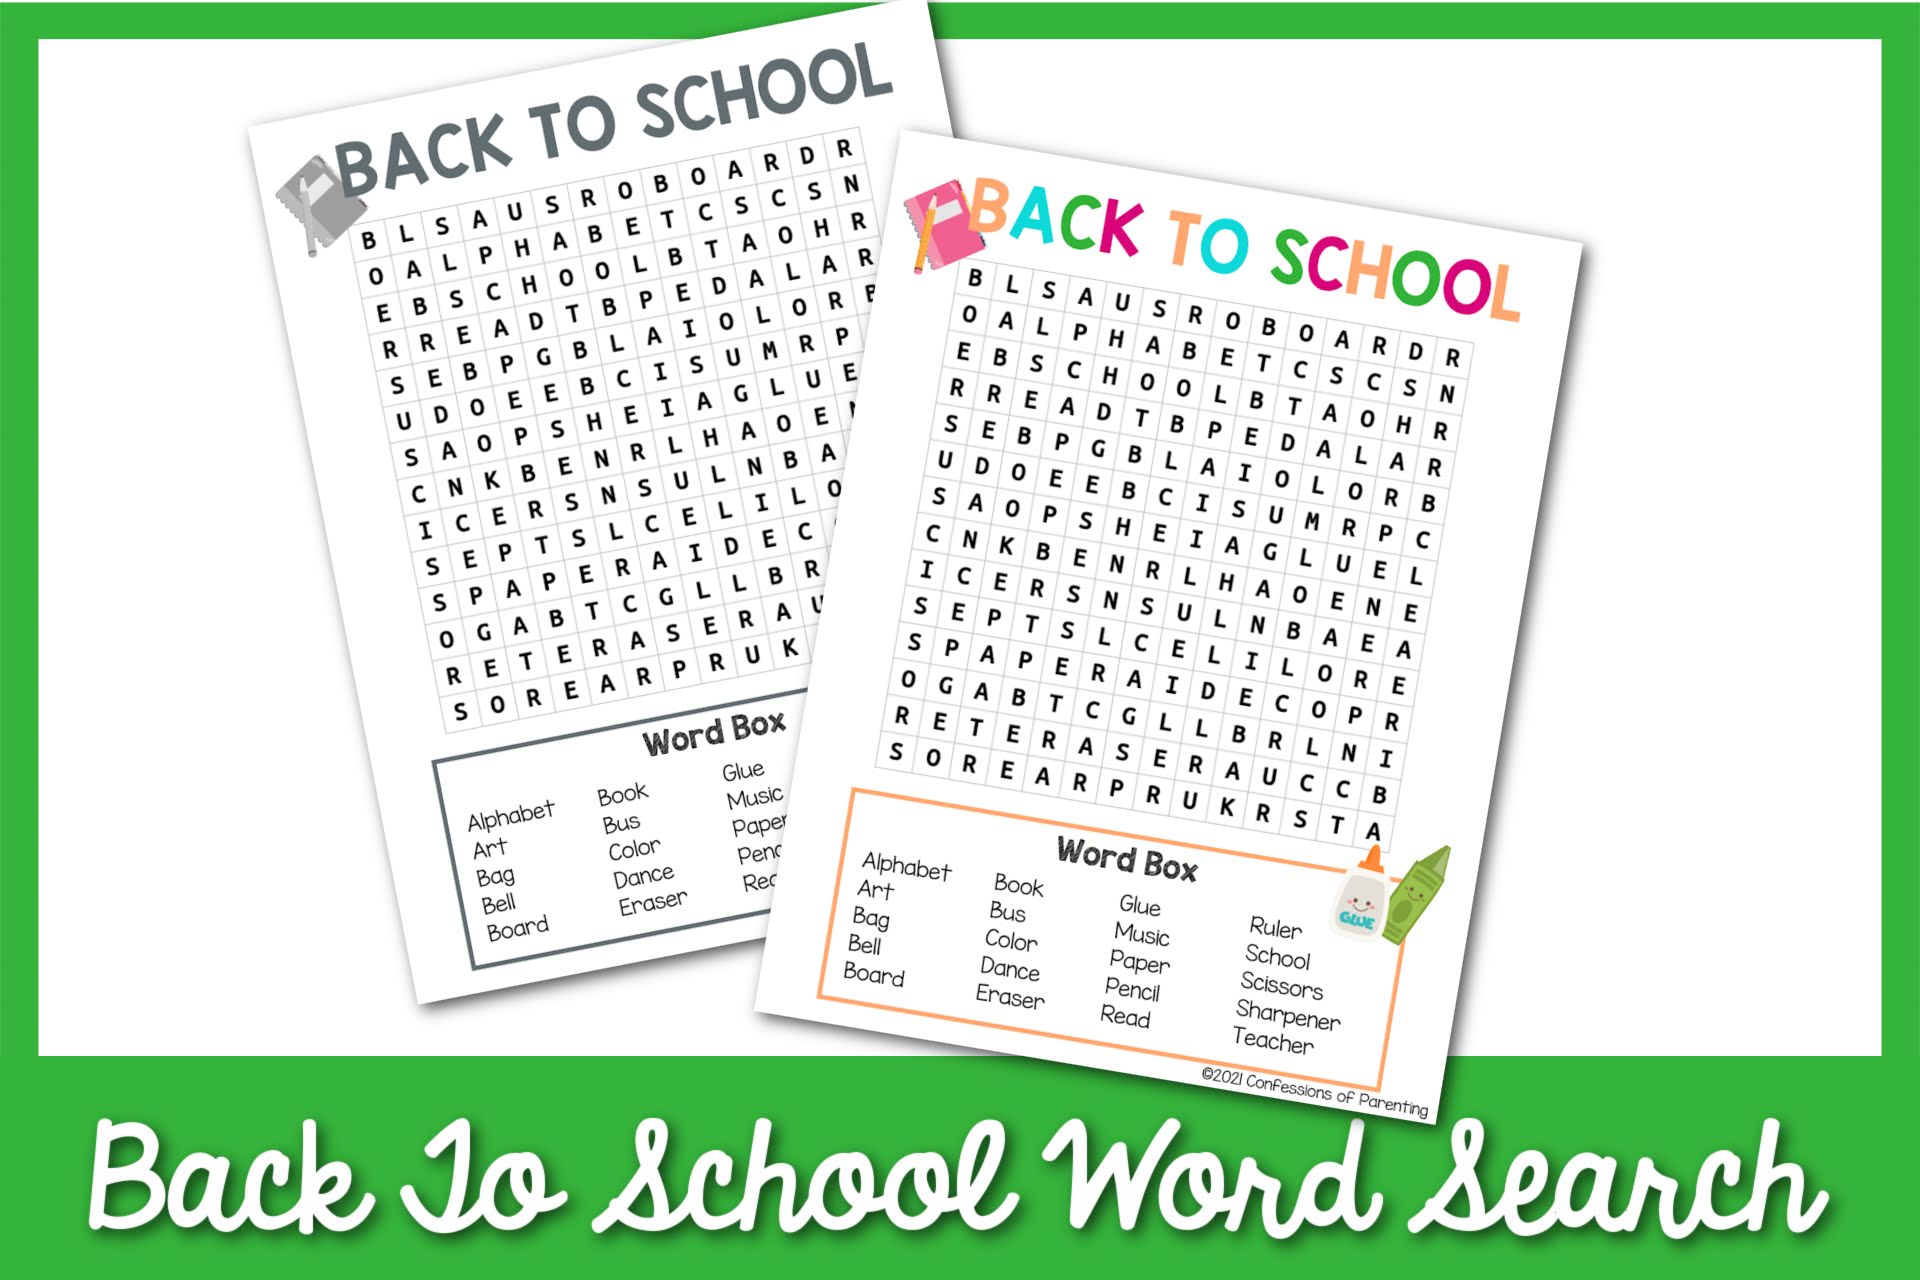 Feature: Back to school word search printable with green border